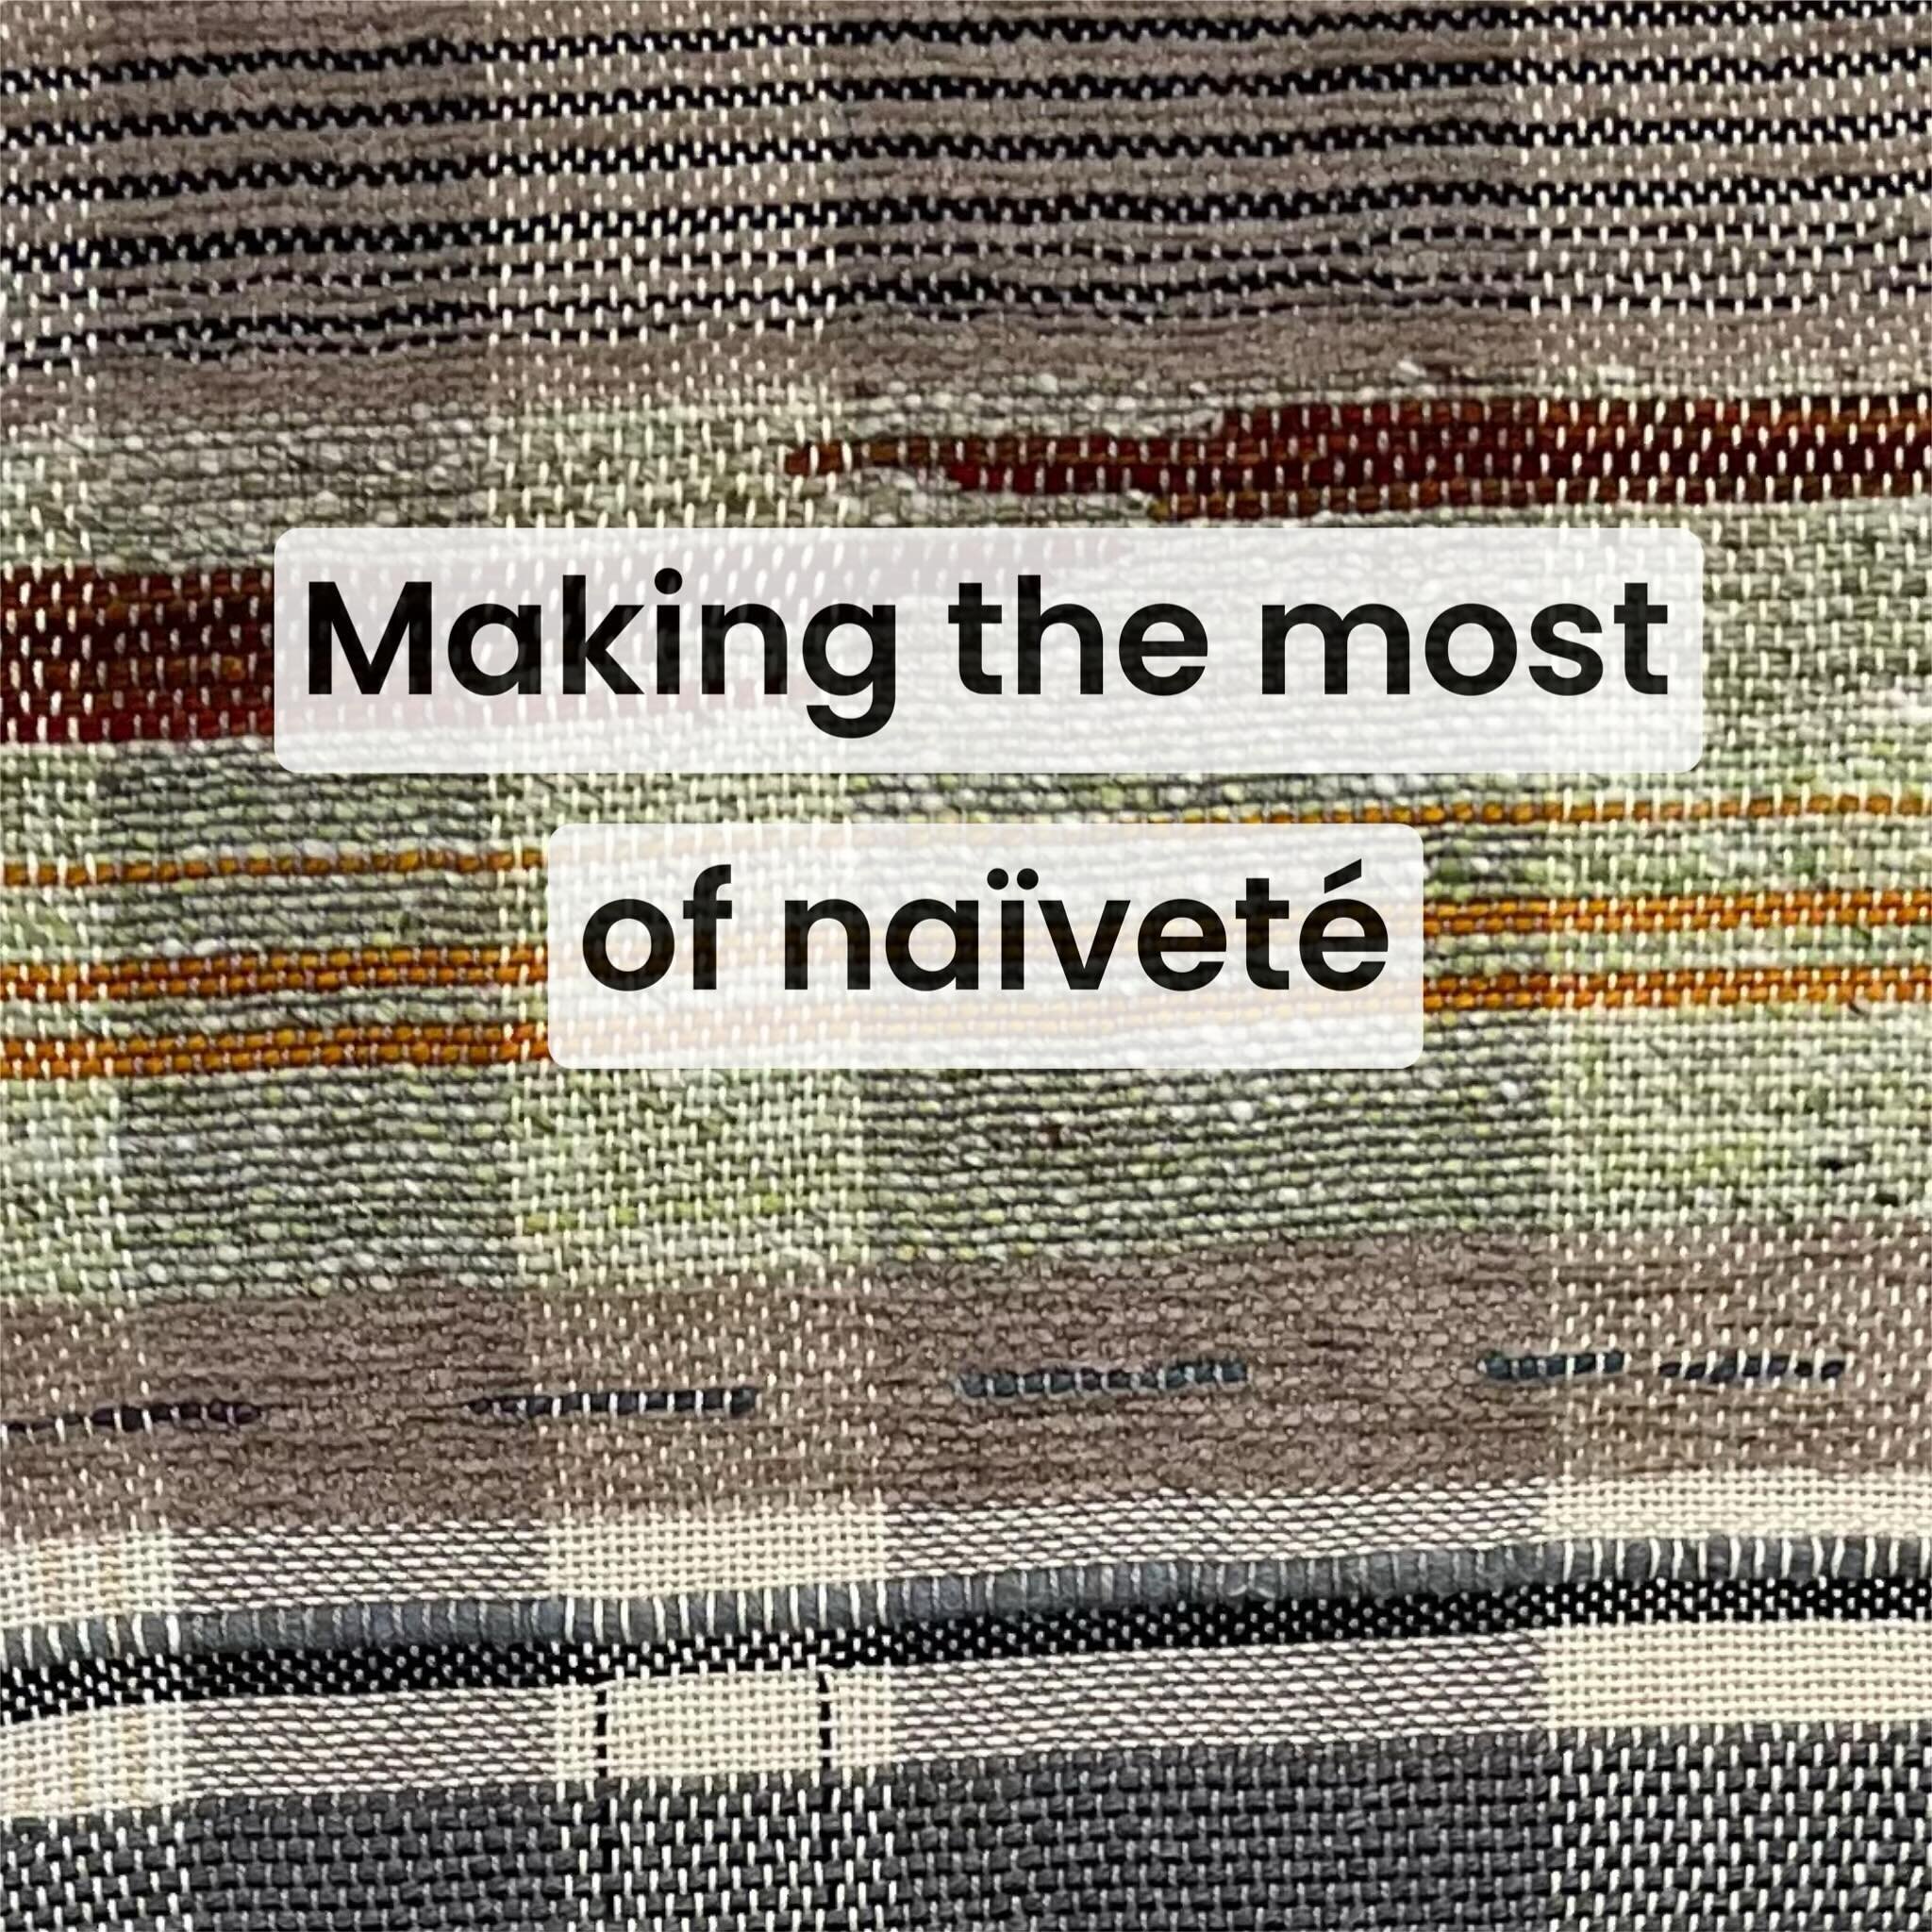 Read my new blog post. It&rsquo;s about my developing adventure in weaving!
You&rsquo;ll find the link under my bio or by clicking the New Writing story, above. @hyattsvillefiberartsguild @artclothnetwork #newweaver #rigidheddleloom #artquilt